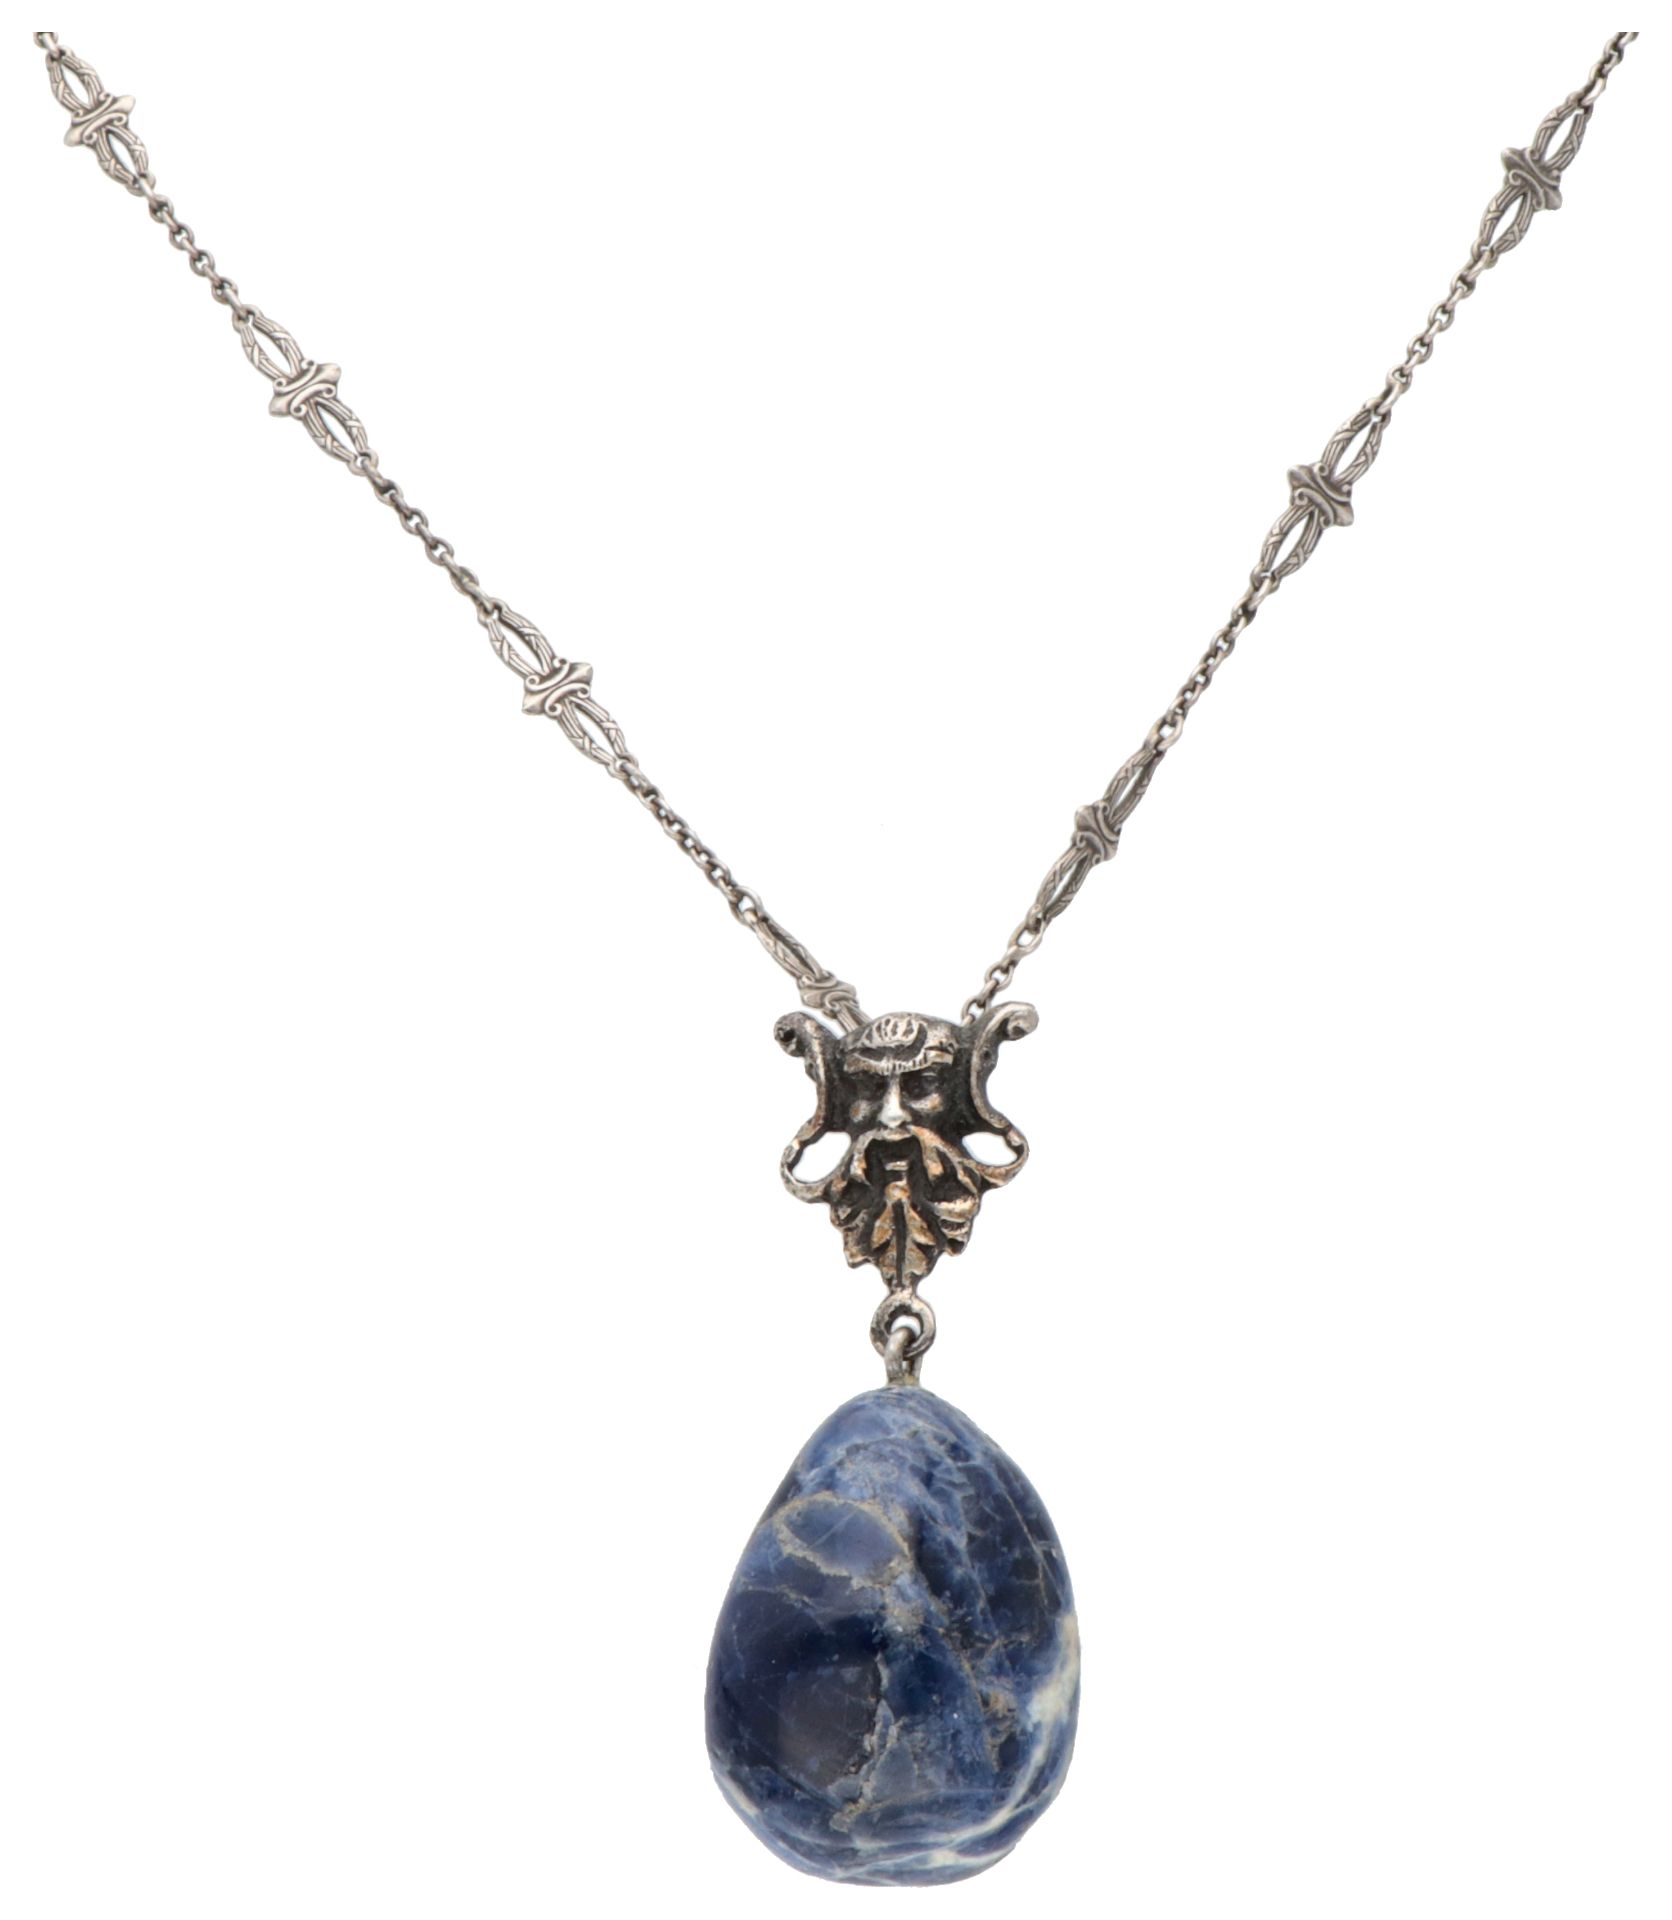 Silver necklace with a sodalite pendant depicting the Celtic 'Green Man'.